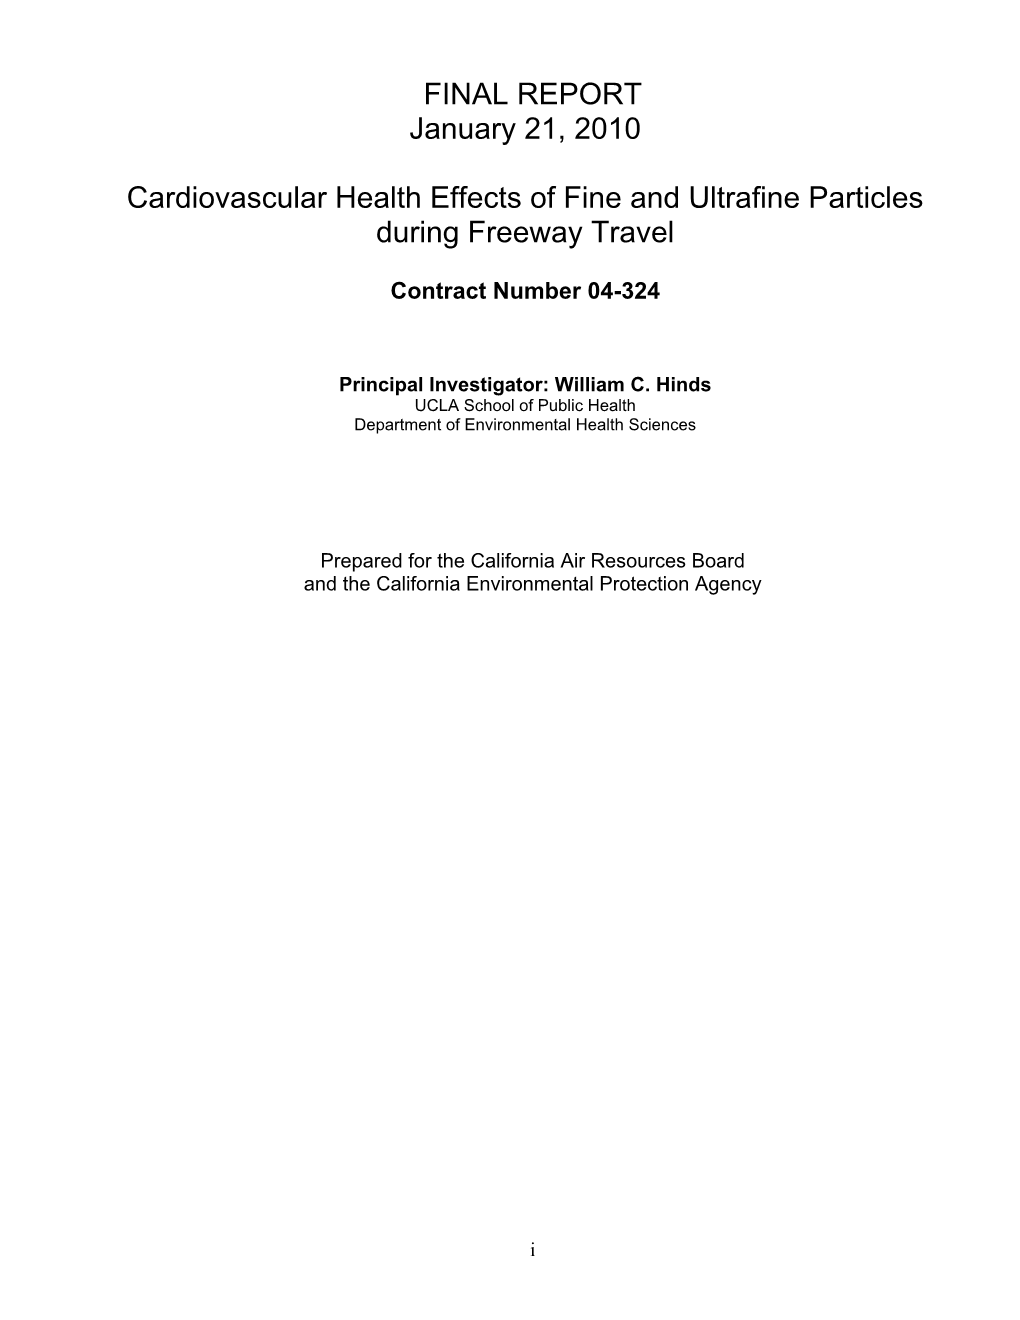 1/21/2010 Final Report for Contract No. 04-324: Cardiovascular Health